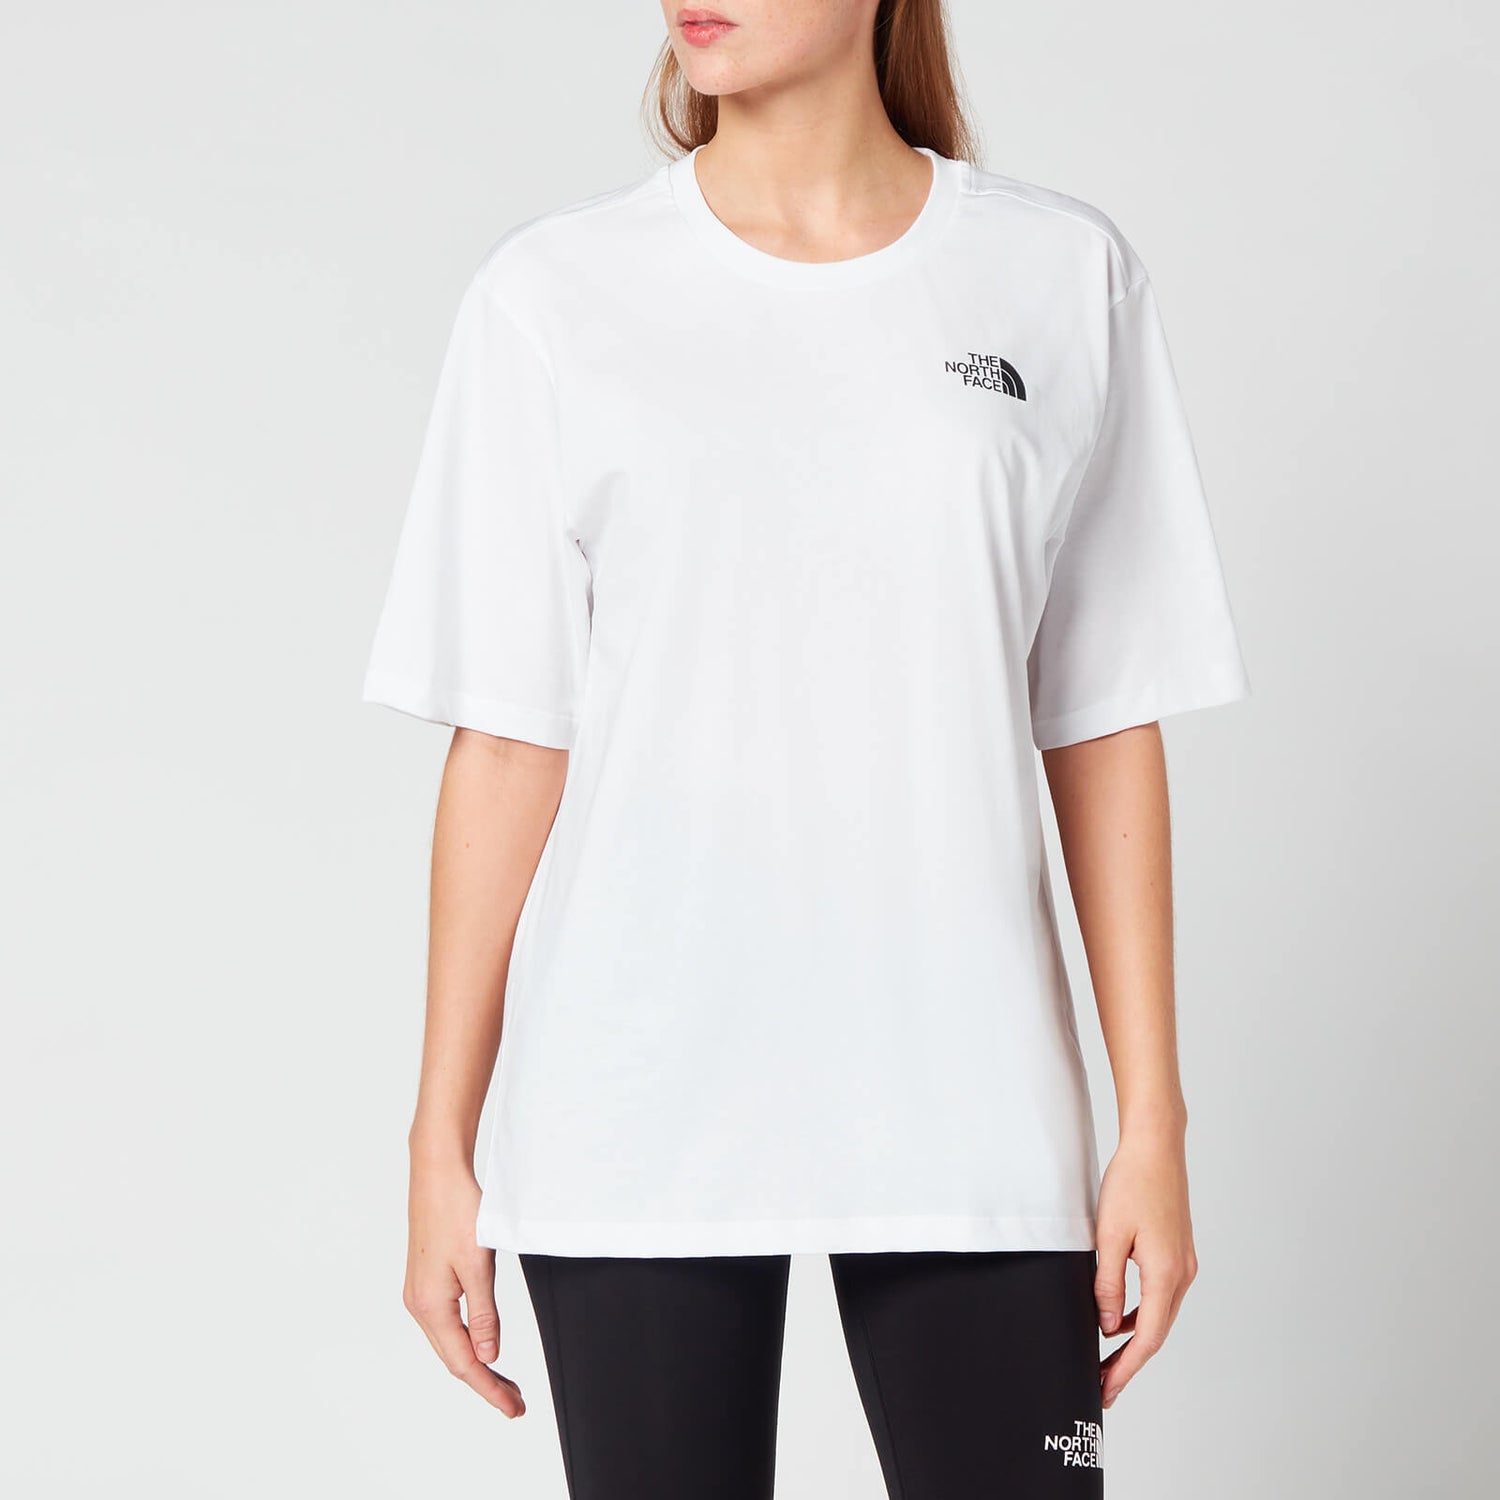 The North Face Women's Bf Simple Dome - White - L